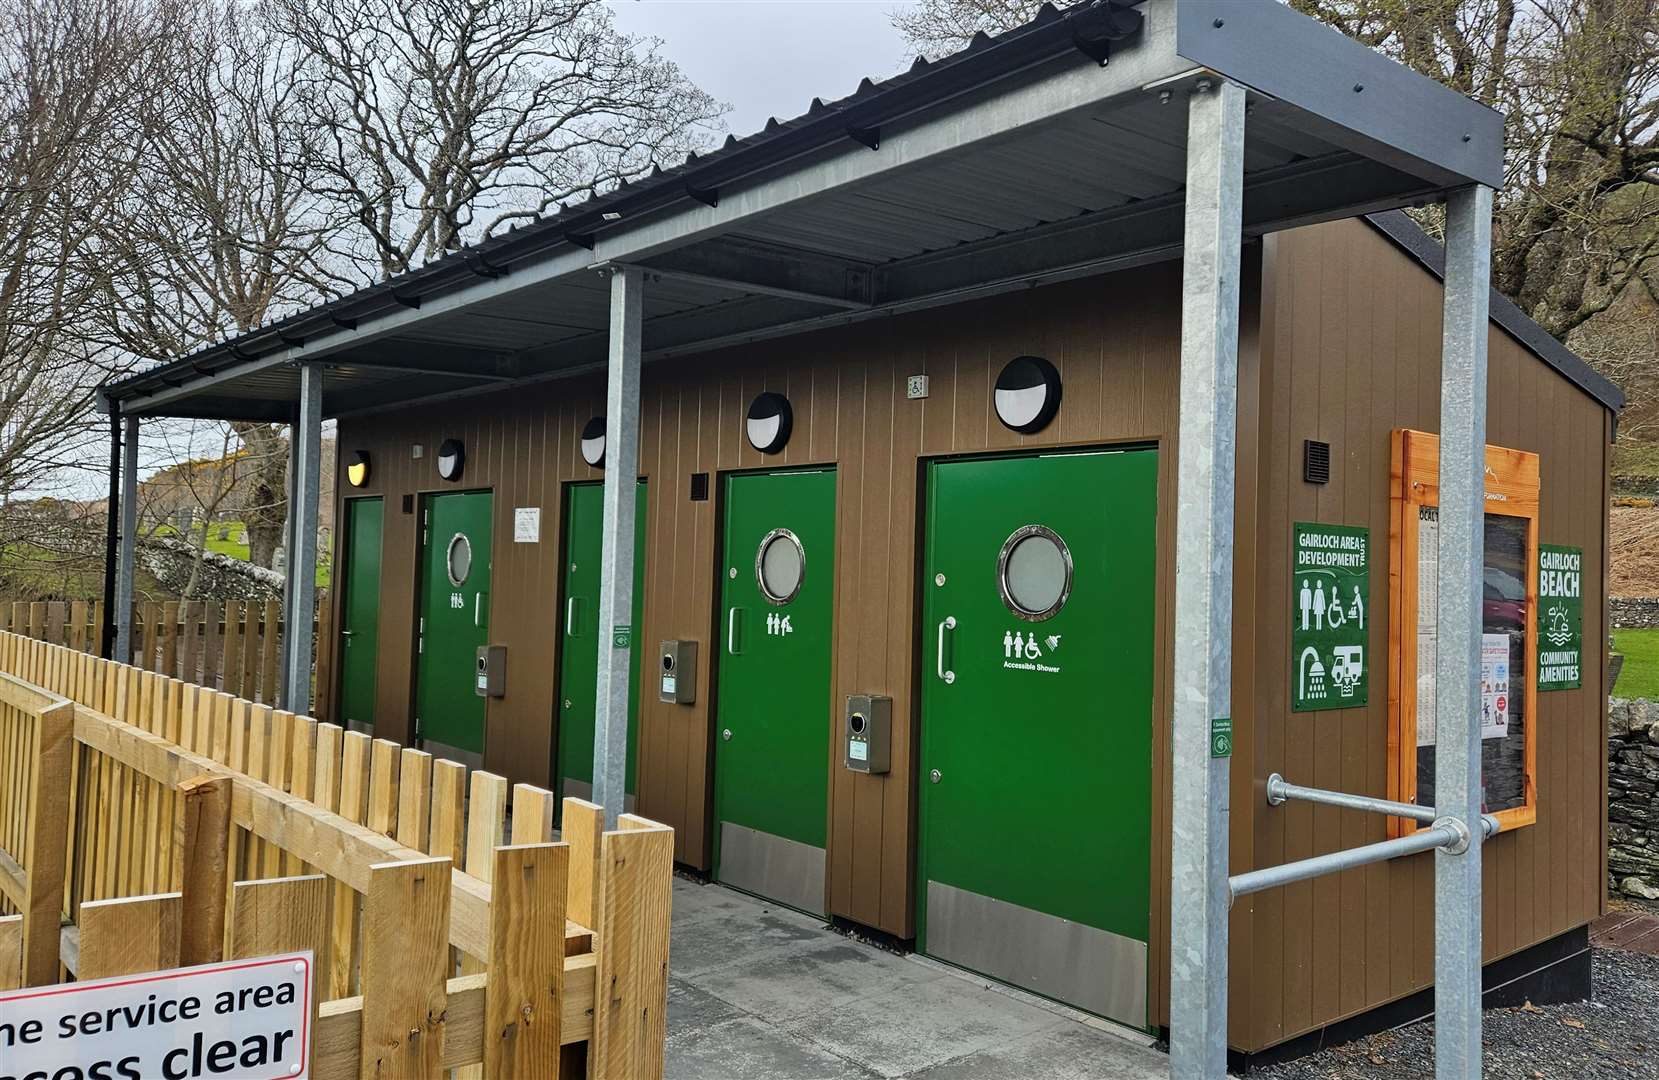 The new public toilets in Gairloch, with new facilities such as showers and chemical waste disposal. Picture: Highland Council.